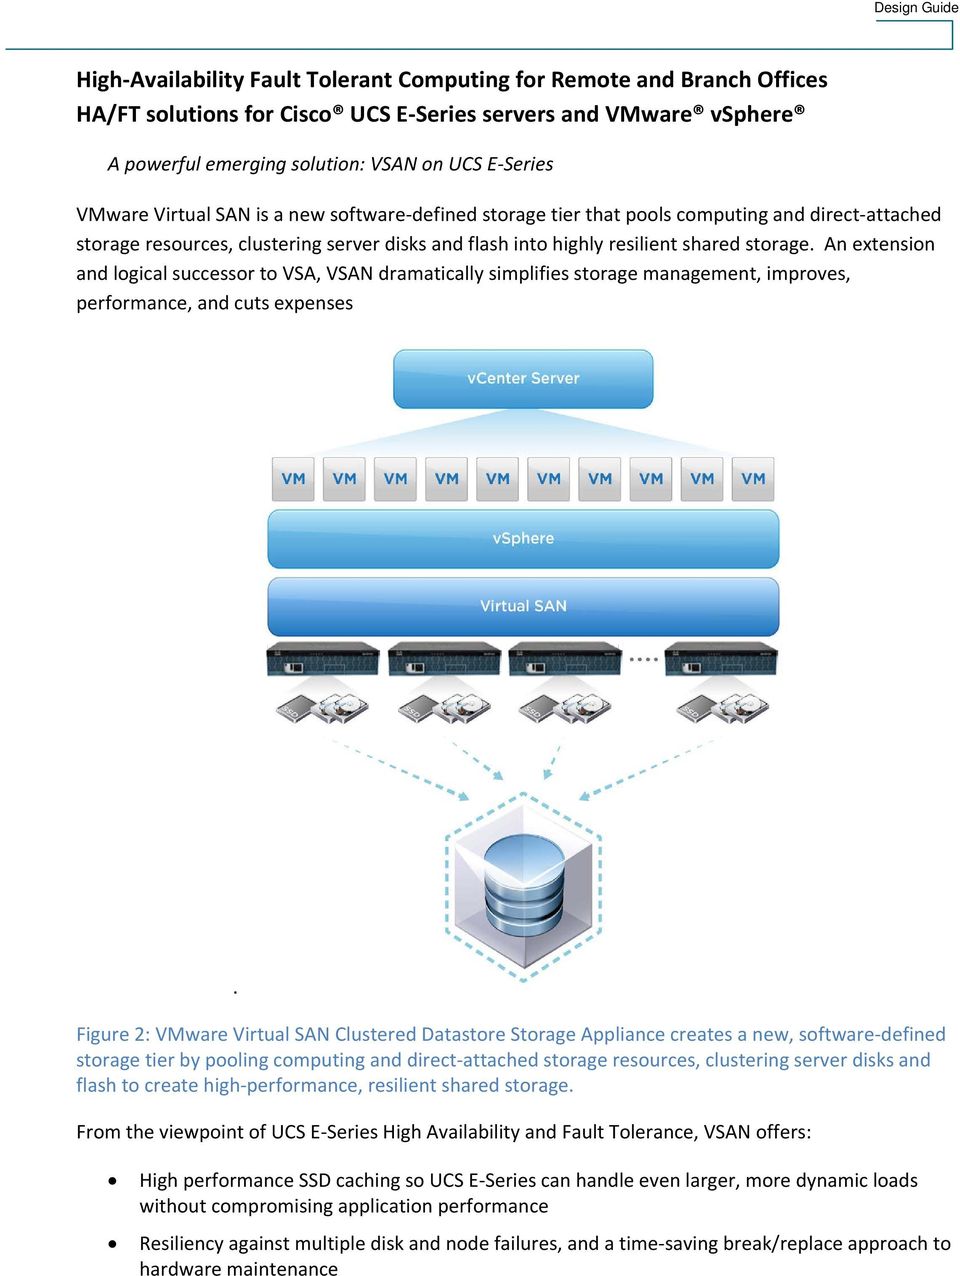 Figure 2: VMware Virtual SAN Clustered Datastore Storage Appliance creates a new, software-defined storage tier by pooling computing and direct-attached storage resources, clustering server disks and